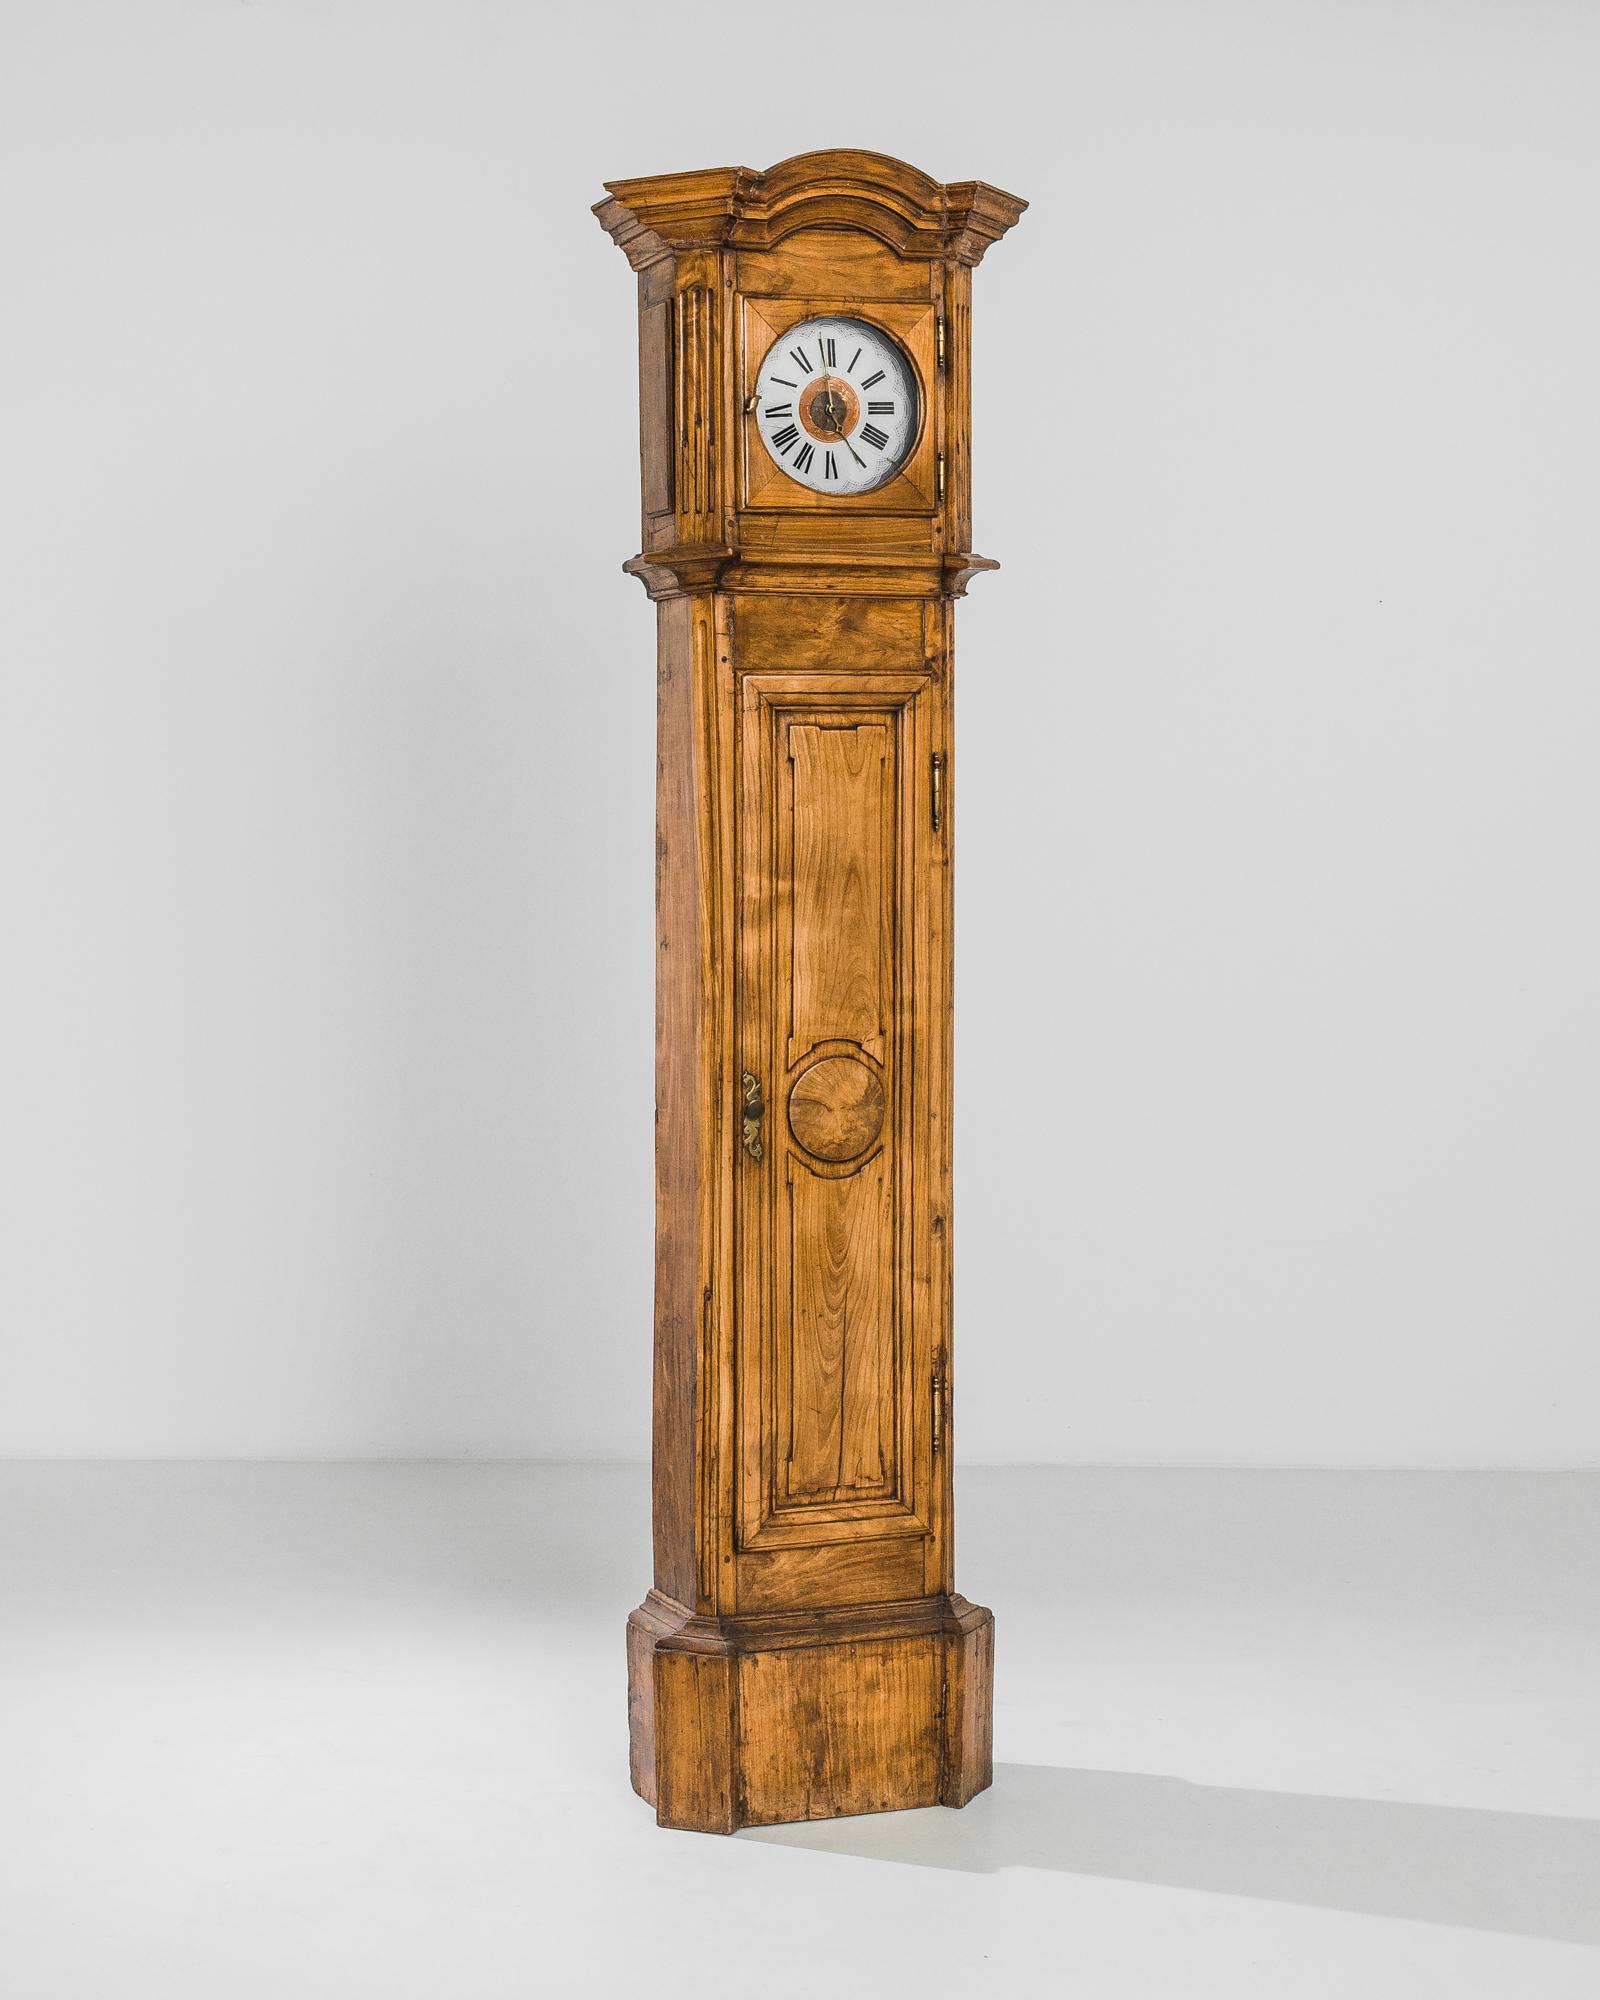 A wooden floor clock from France, produced circa 1820. Standing at an spectacular seven feet three inches, this gargantuan grandfather clock makes for an impressive timepiece. Inside the closet sit the pendulum and weight that keep this machine